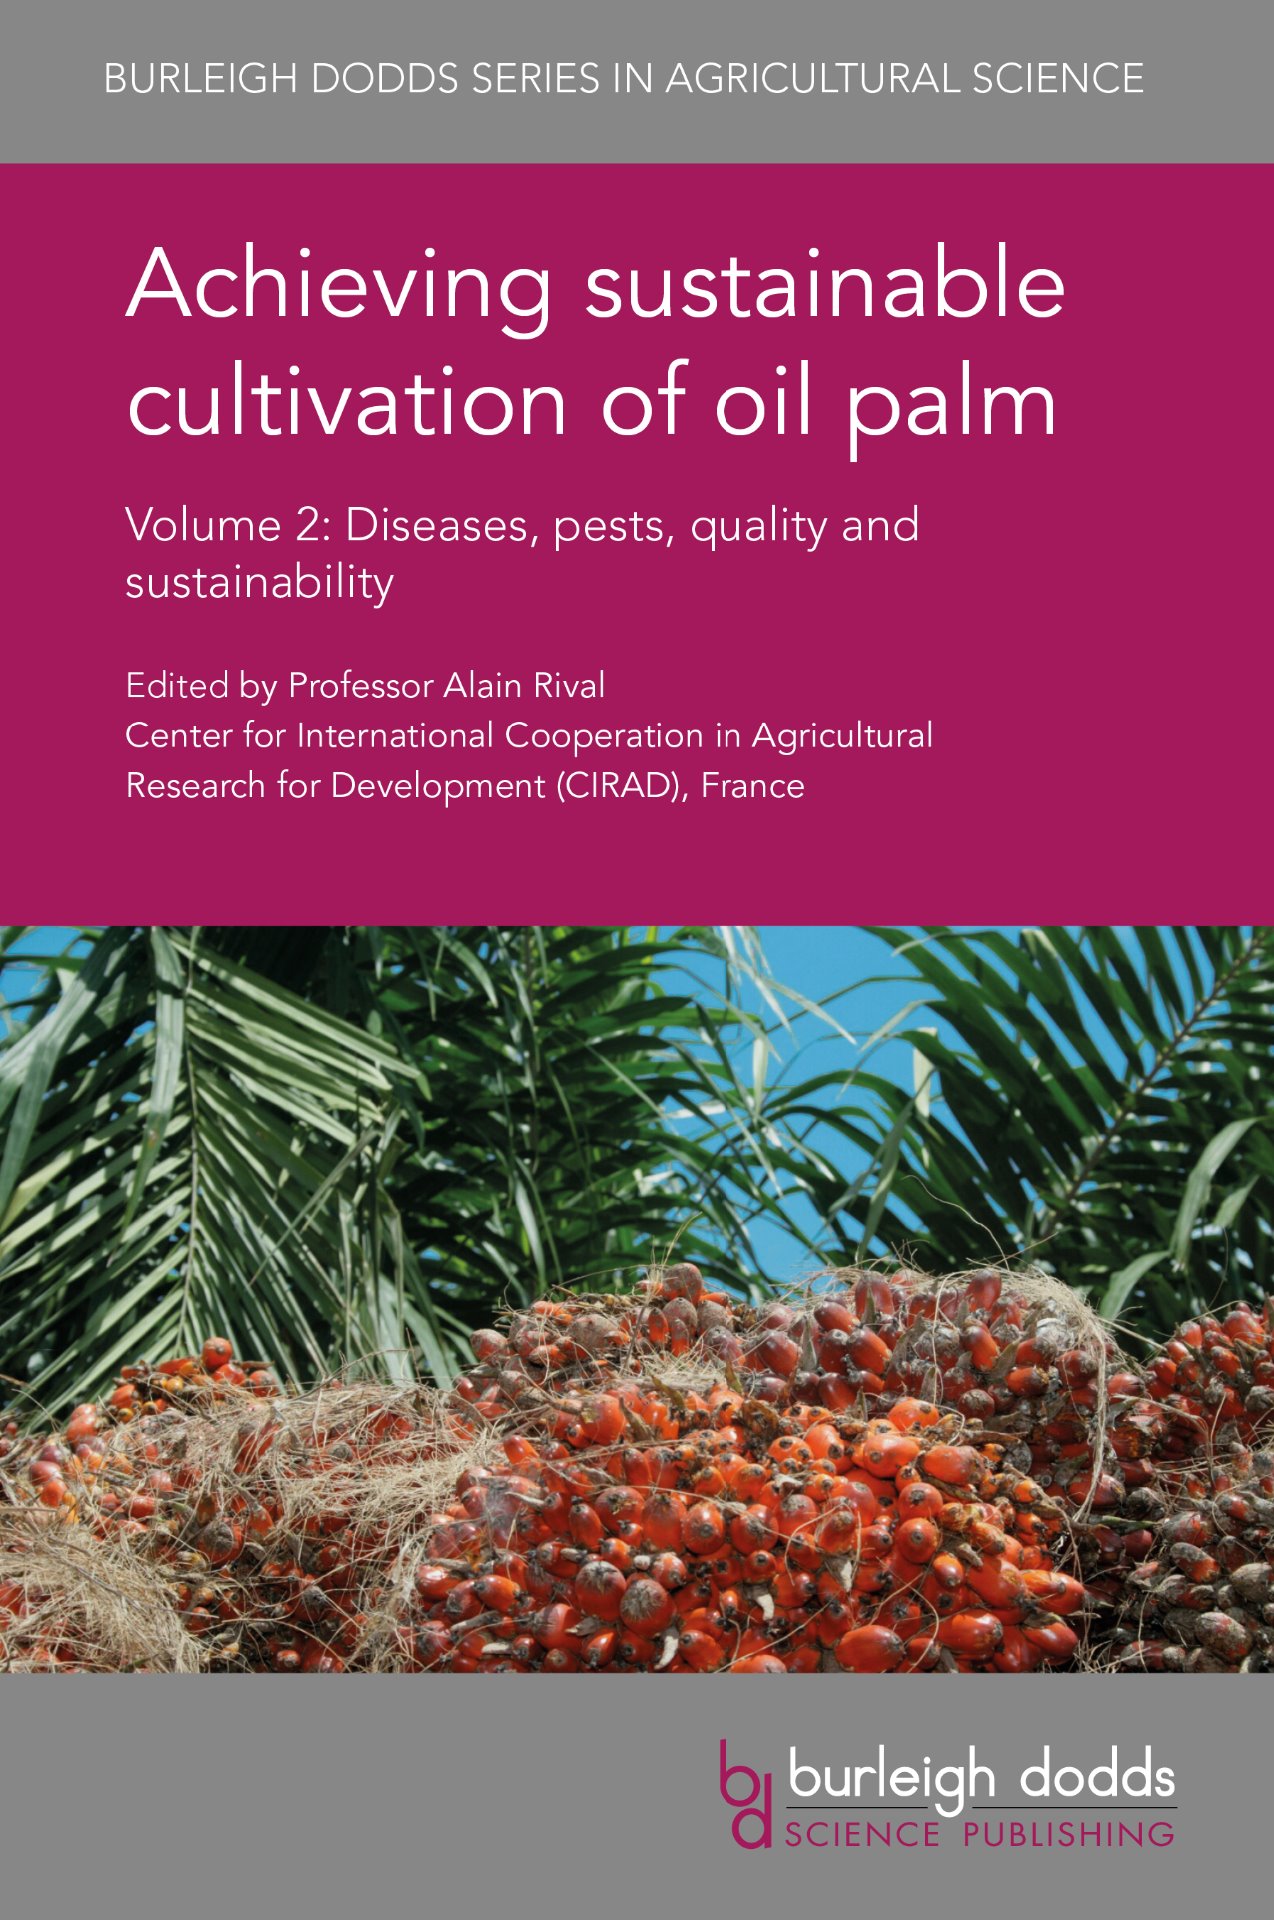 Achieving sustainable cultivation of oil palm